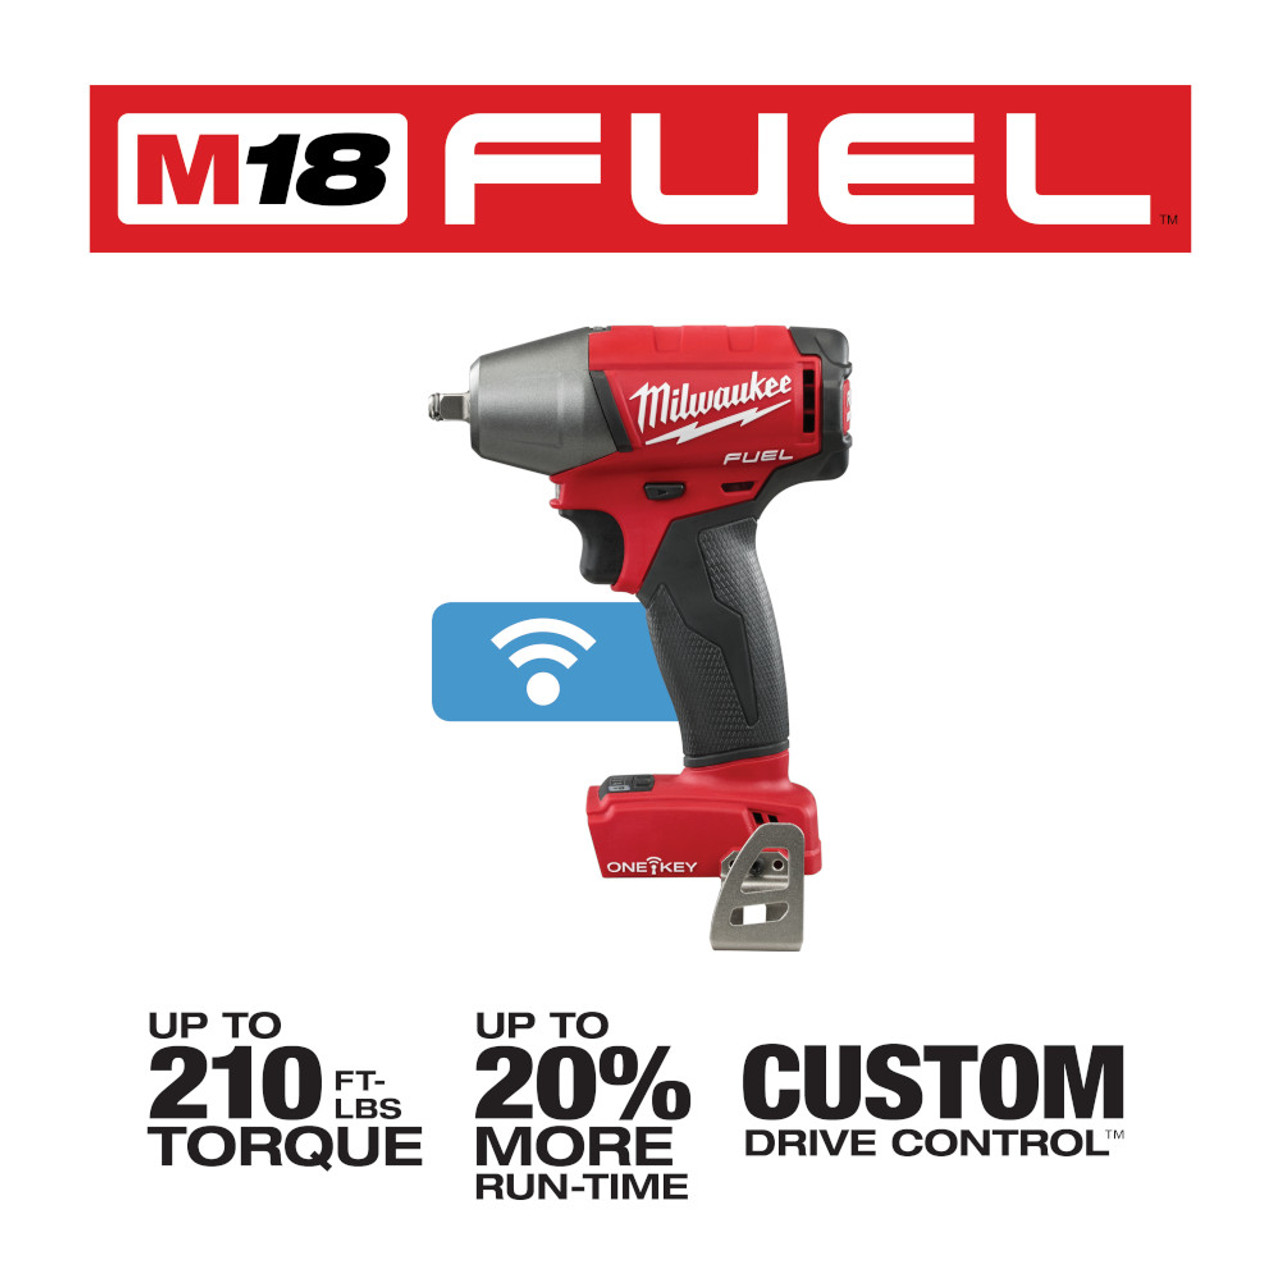 M18 FUEL 18 Volt Lithium-Ion Brushless Cordless 3/8 in. Compact